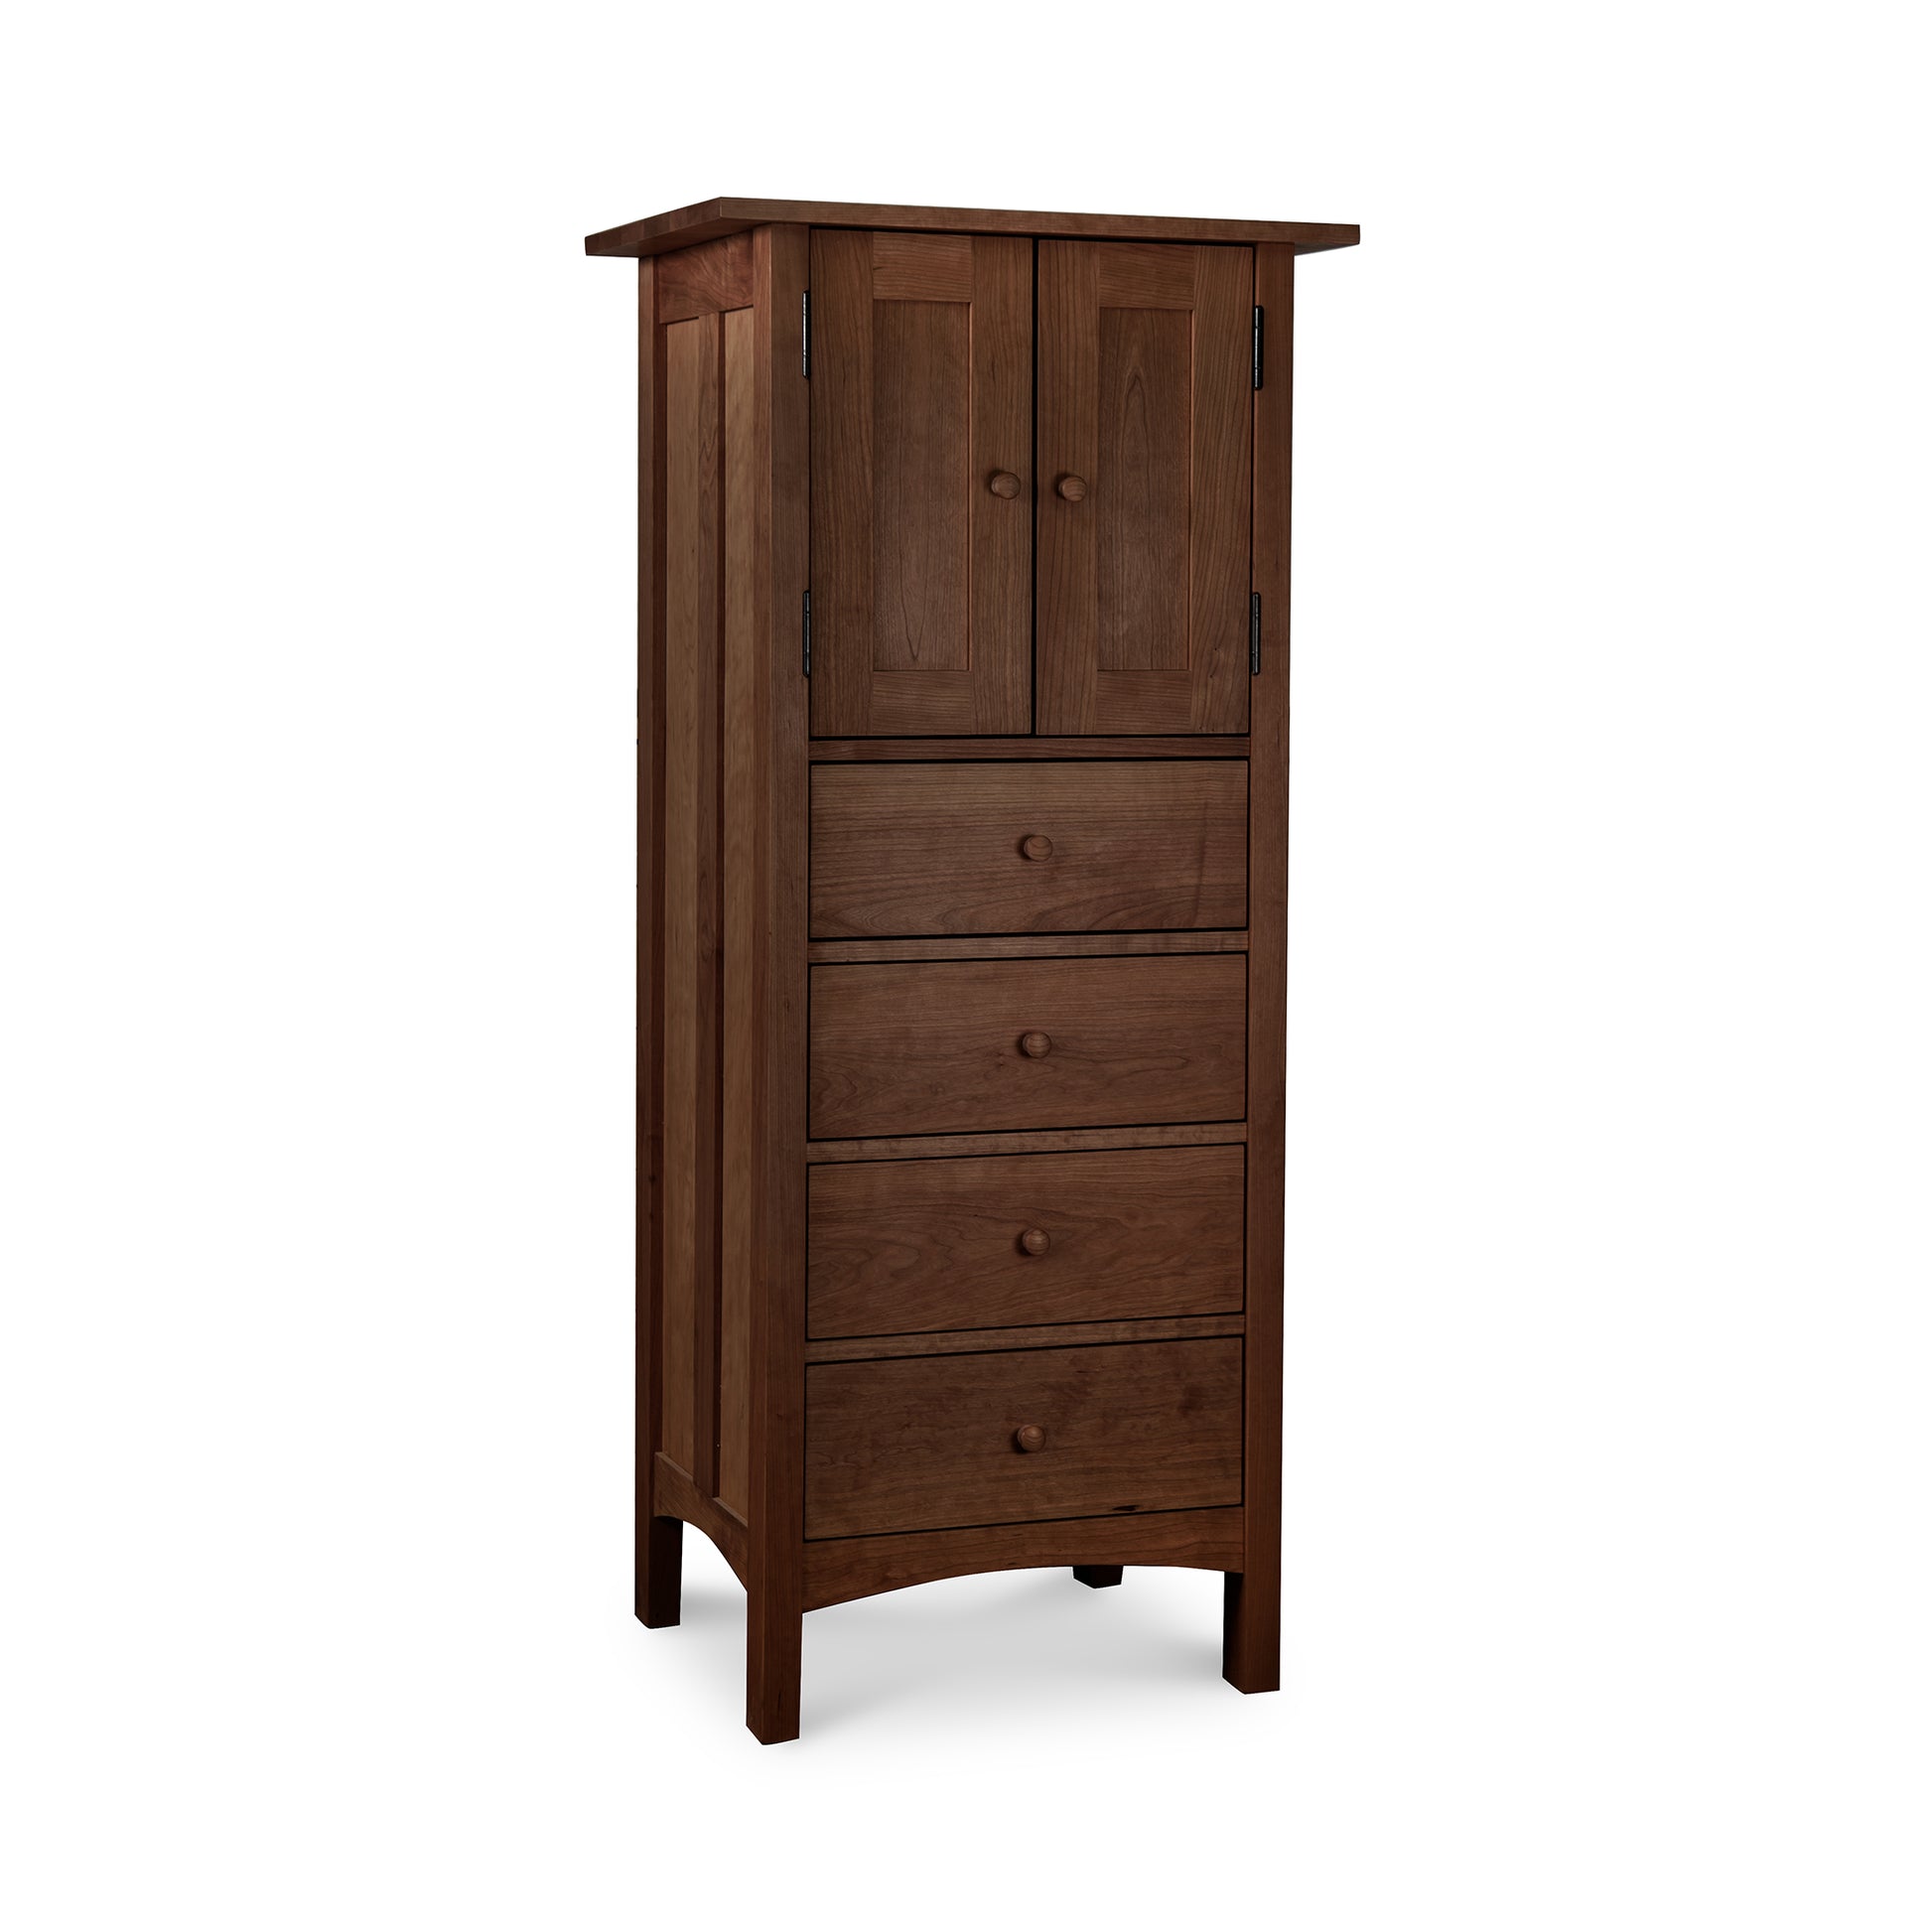 A contemporary Vermont Furniture Designs Burlington Shaker Tall Storage Chest with a door on the upper half and four drawers below, set against a white background.